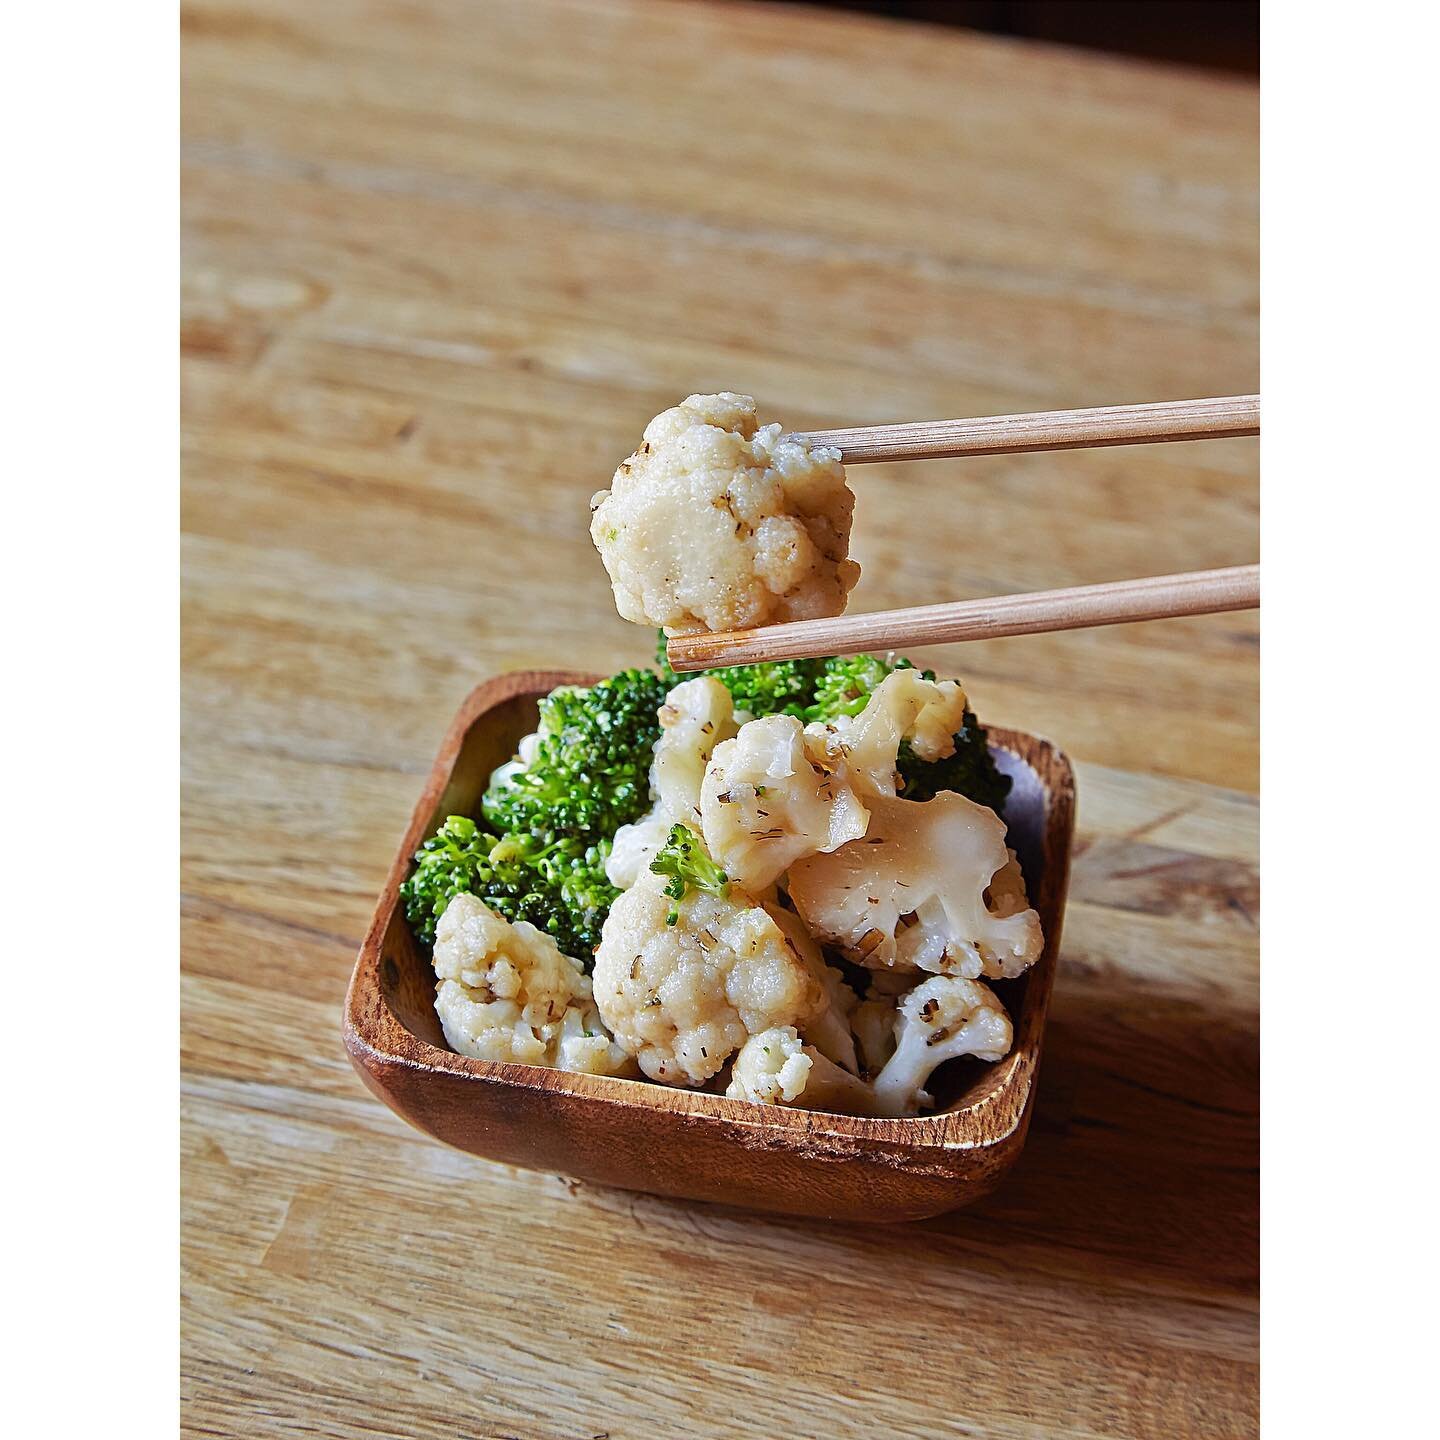 KOMBU CAULIFLOWER BROCCOLI POP
Simply veggies, but surprisingly savory and satisfying. Great friend of Wine and Sake.

#cauliflower #broccoli #eatyourveggies

&mdash;&mdash;&mdash;&mdash;&mdash;
Now we&rsquo;re serving a full menu for our outdoor din